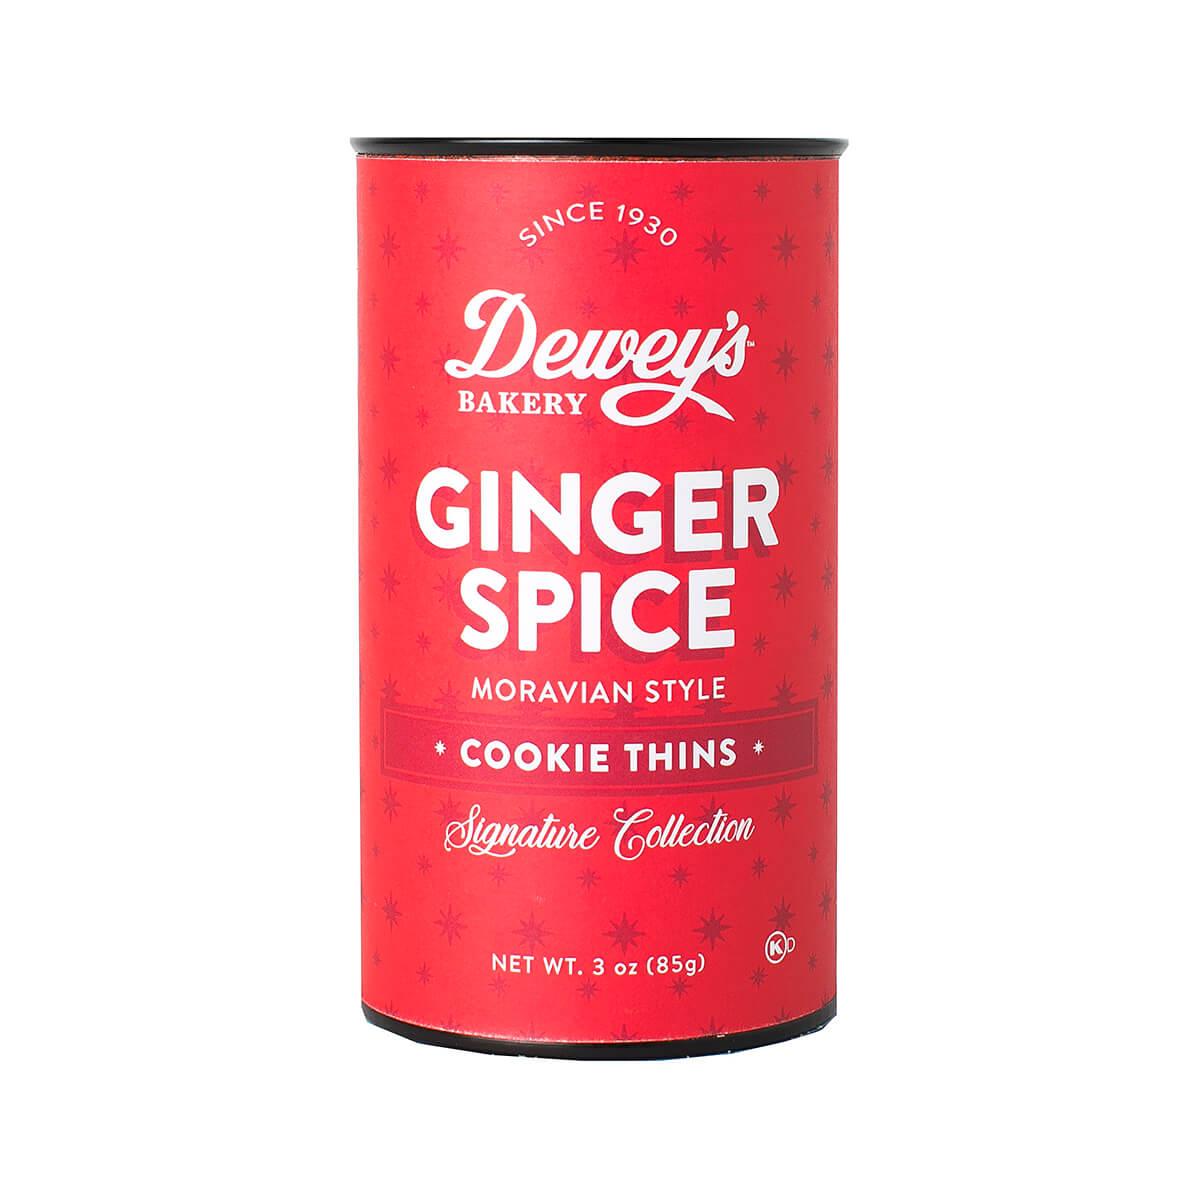  Ginger Spice Moravian Cookies - Small Tube